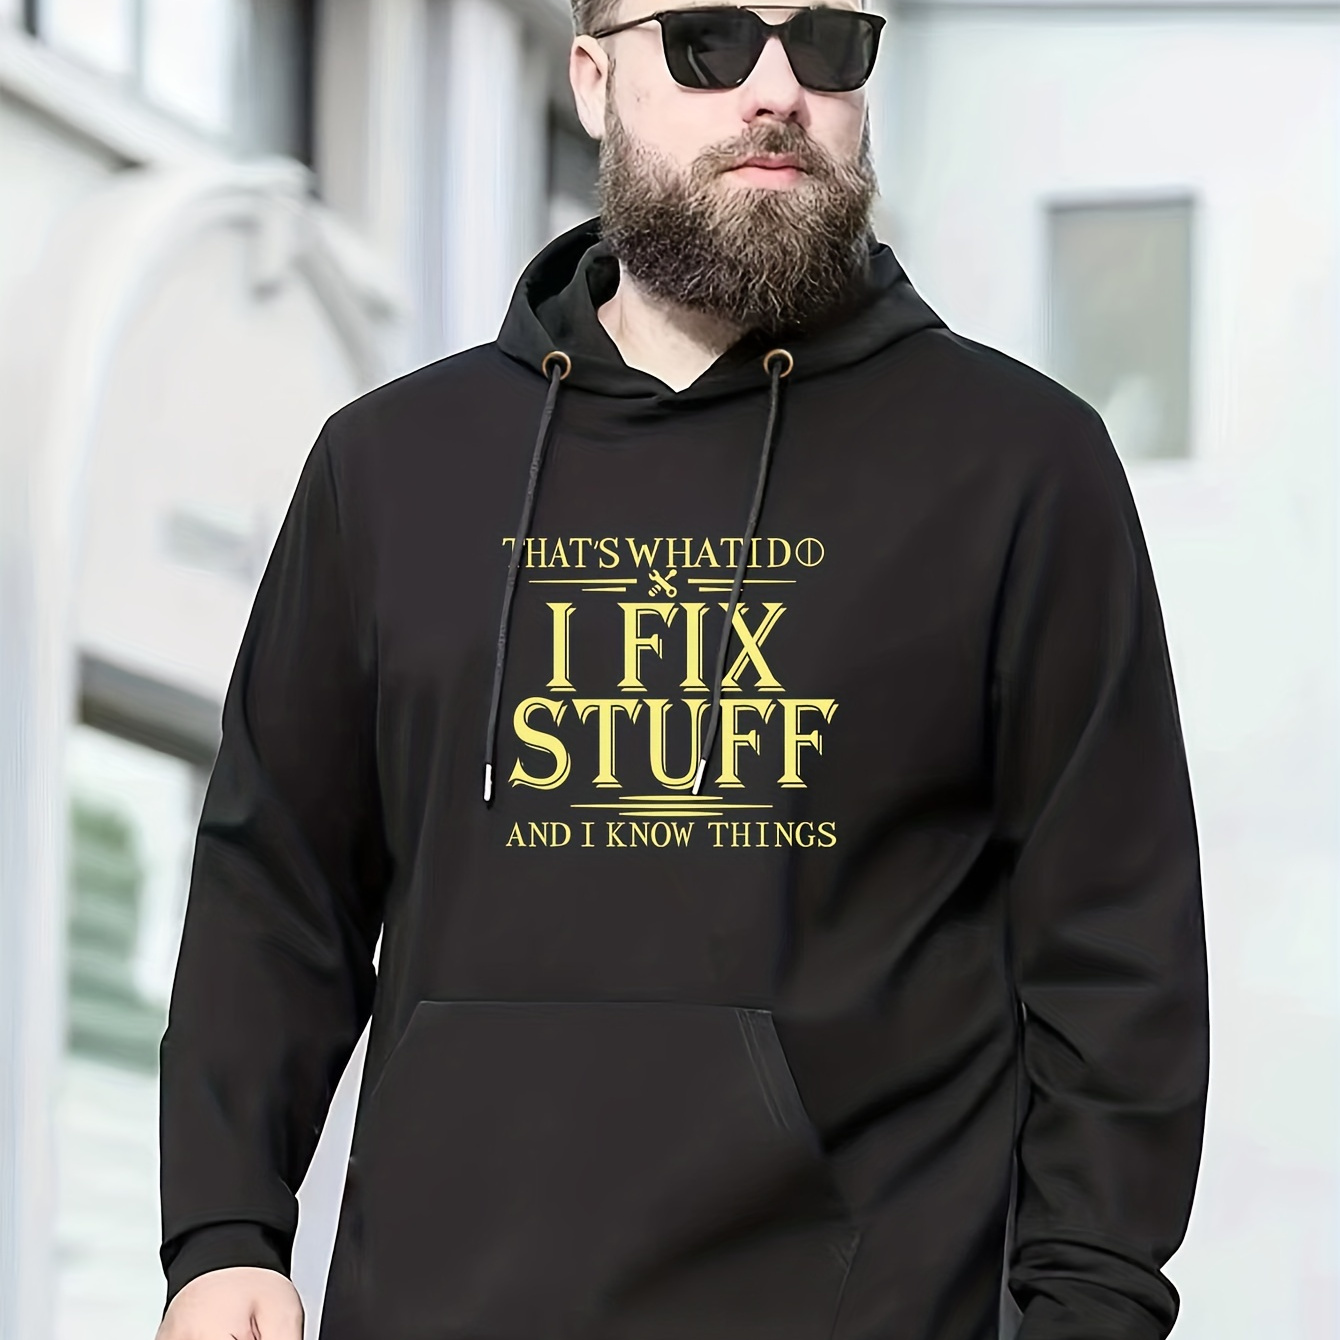 

Plus Size Men's "i Fix Stuff" Print Hooded Sweatshirt Oversized Hoodies Fashion Casual Tops For Spring/autumn, Men's Clothing